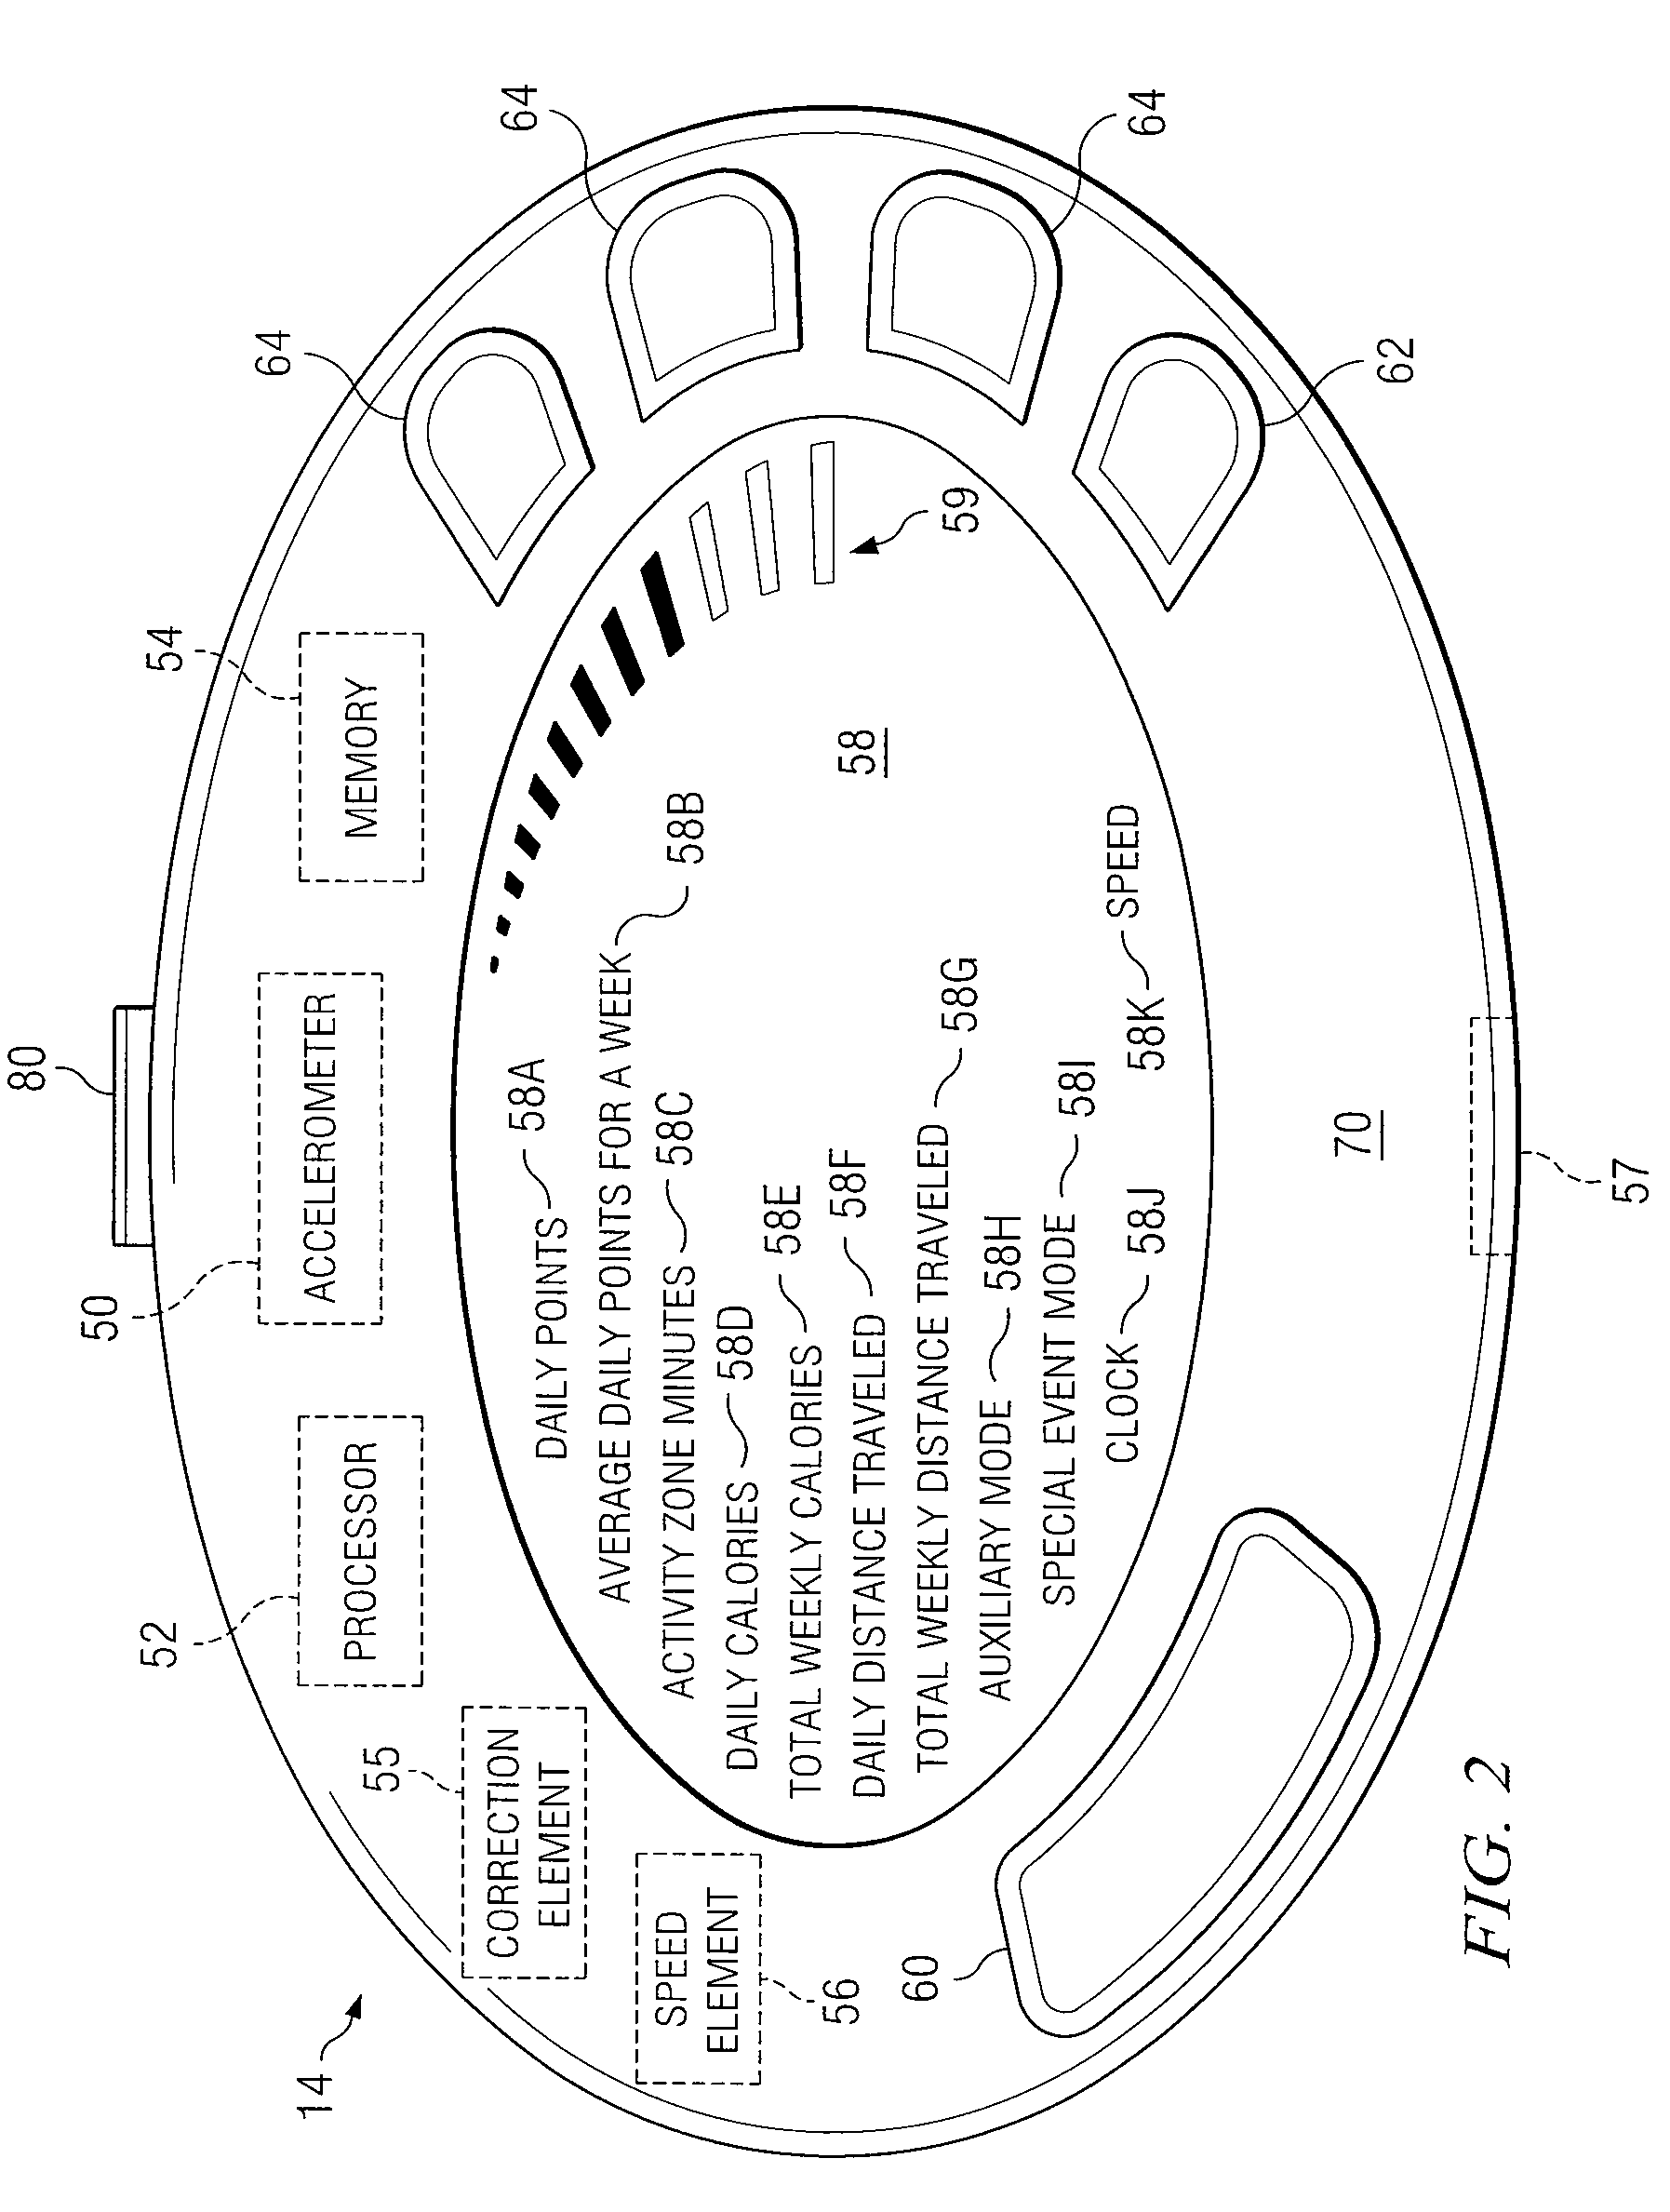 System and method for processing raw activity energy expenditure data